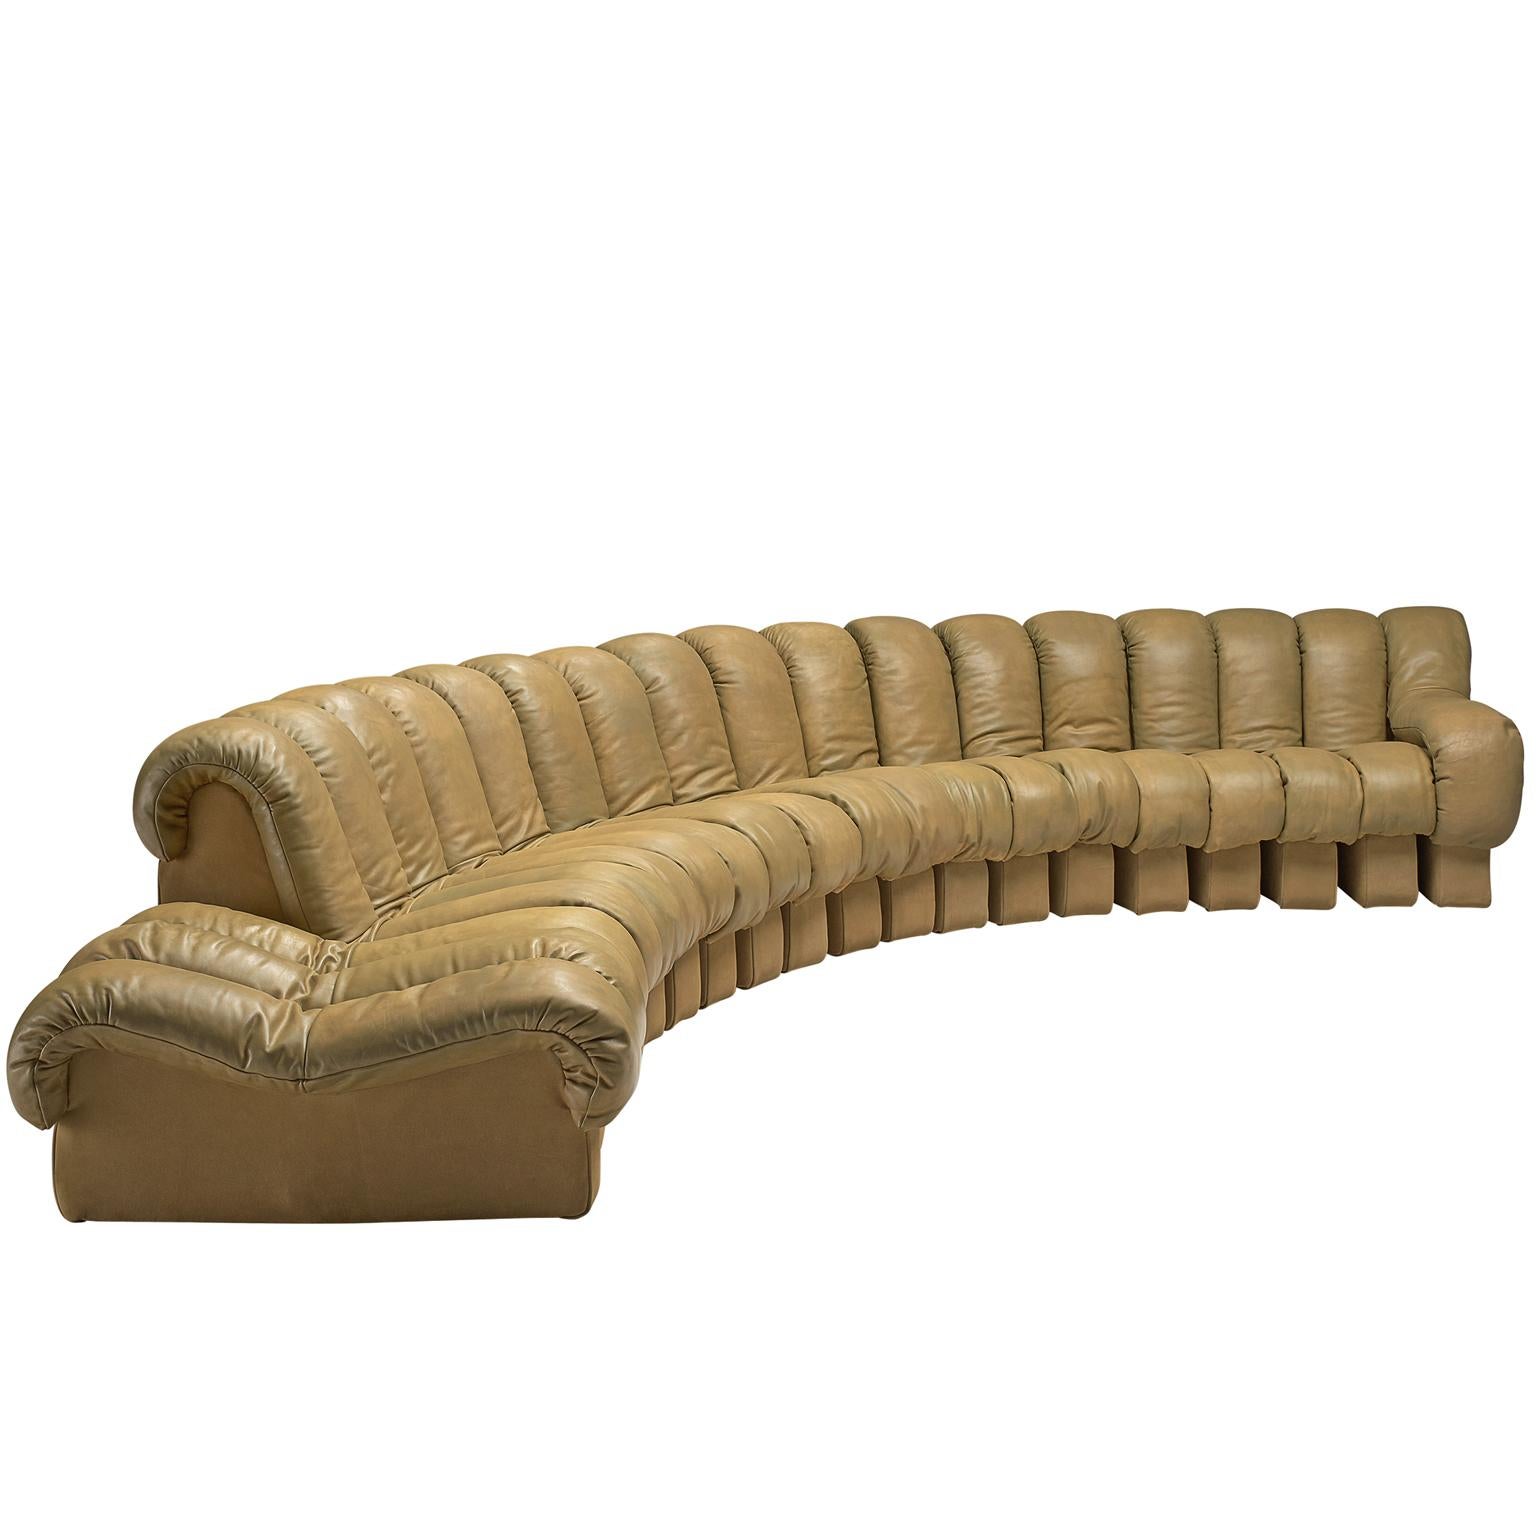 De Sede 'Snake' DS-600 Non Stop Sofa in Beige Leather and Suede